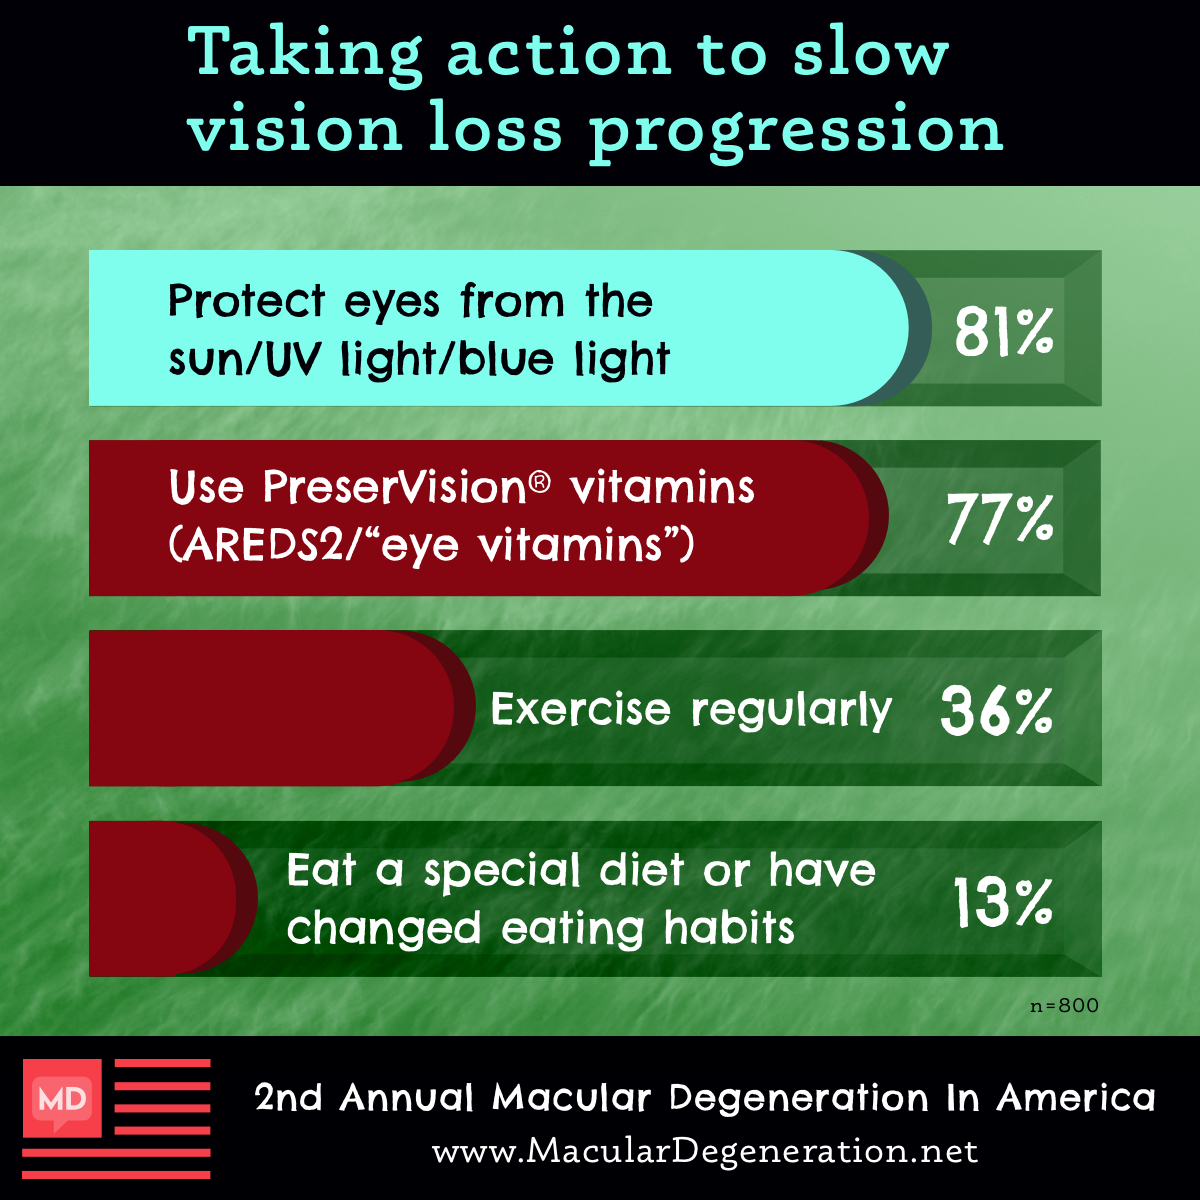 Respondents of the macular degeneration In America survey protect their eyes from UV/blue light, take eye vitamins, and more to slow vision loss progression.